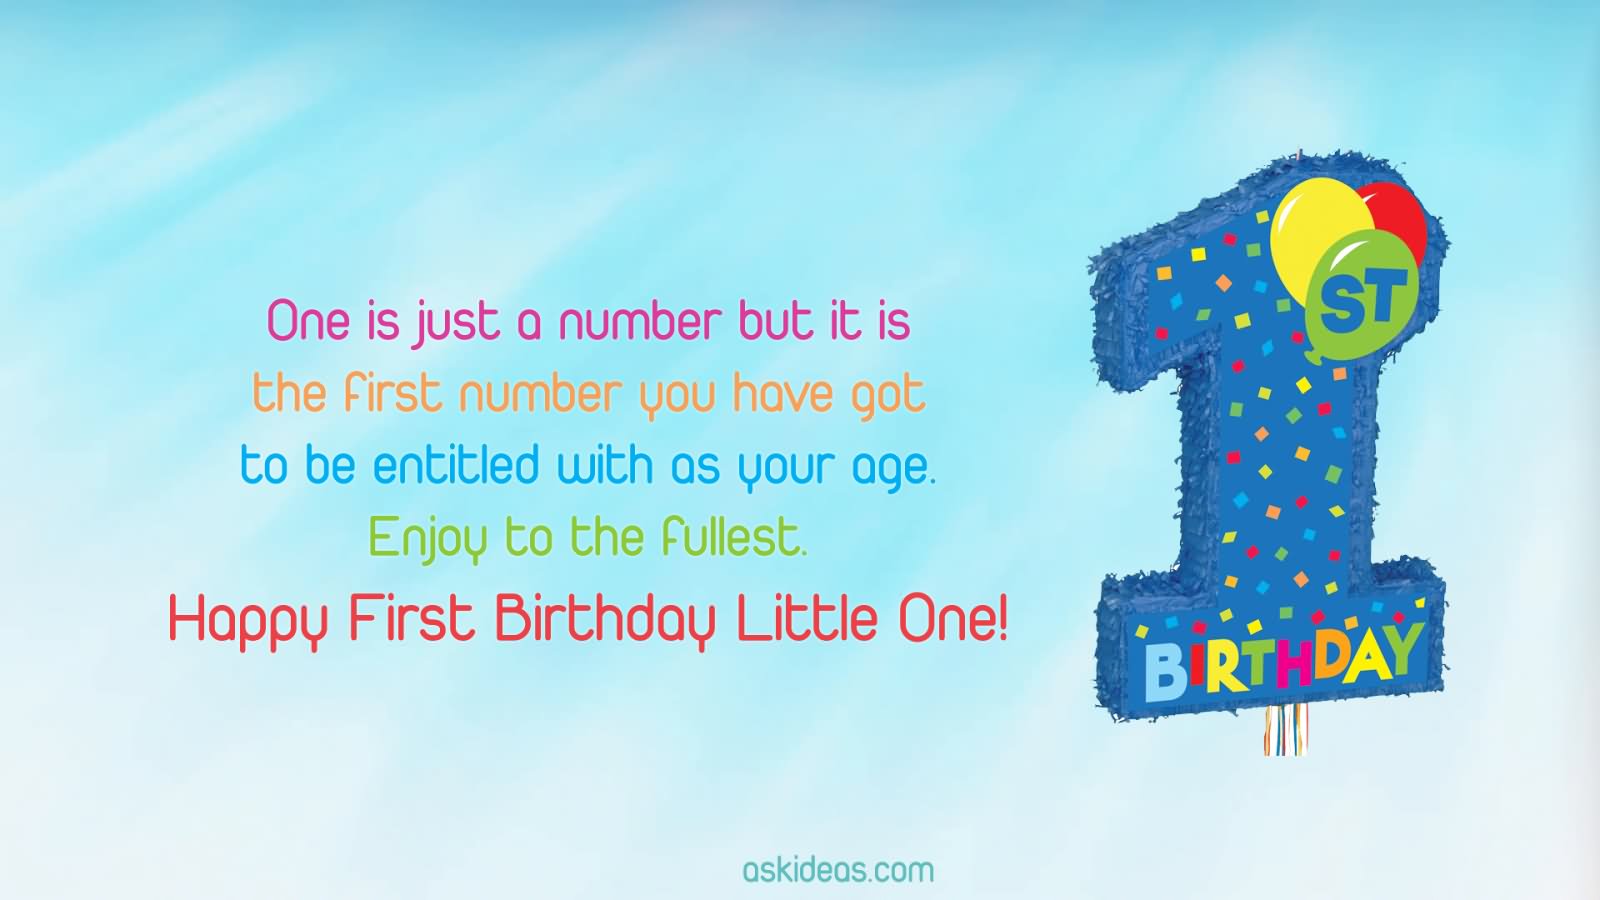 One is just a number but it is the first number you have got to be entitled with as your age. Enjoy to the fullest